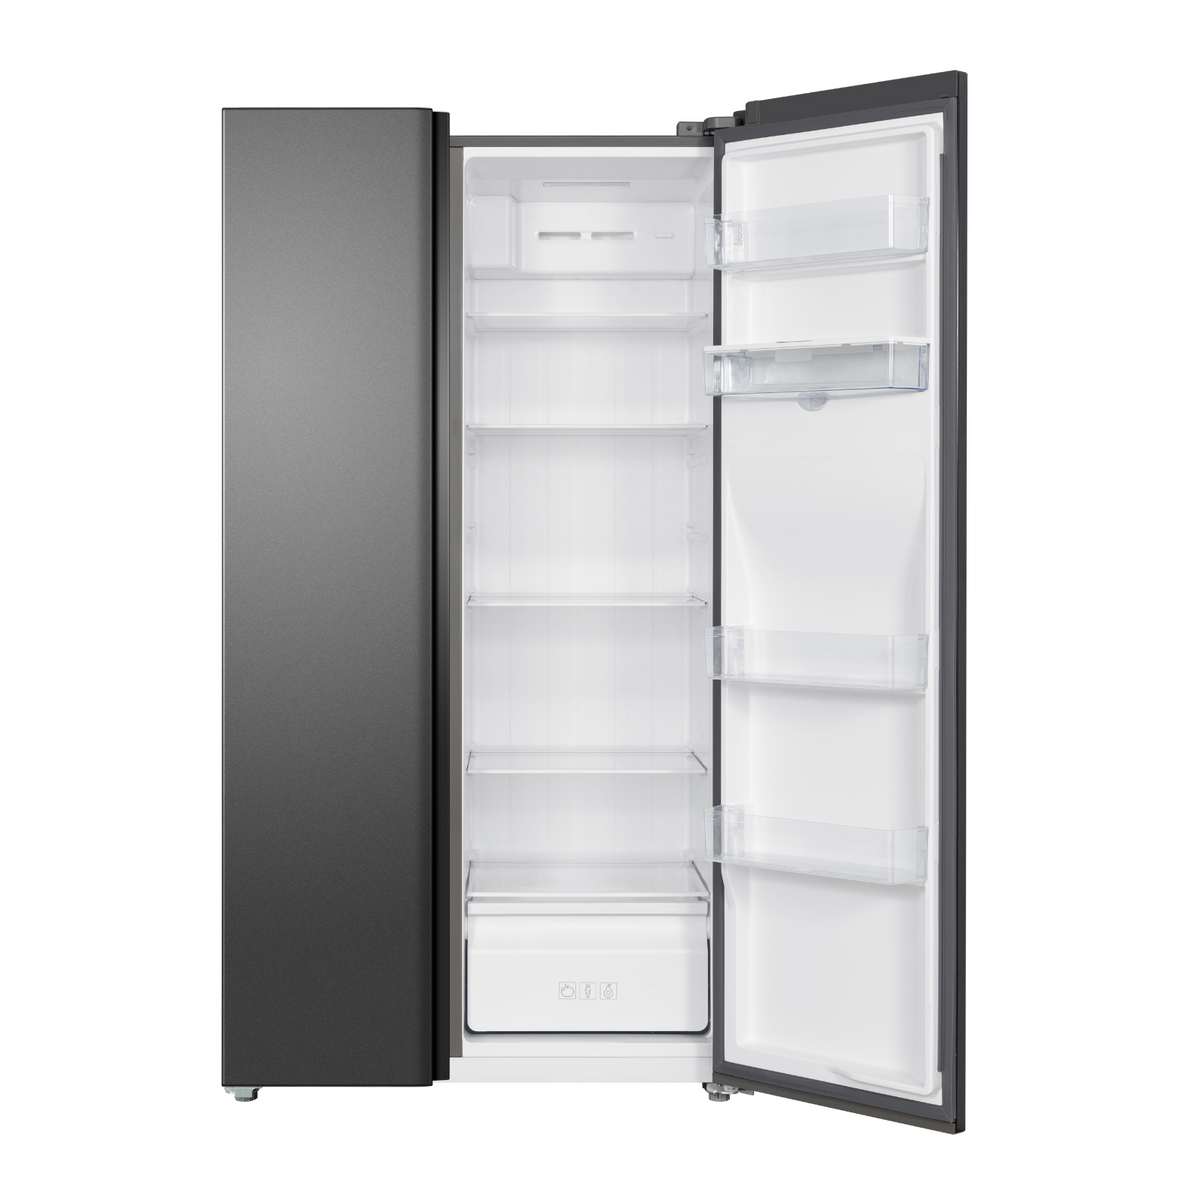 TCL 503L 92CM Non plumbed water dispenser Side by Side Freestanding Fridge Freezer - Dark Silver | RP503SSF0UK from TCL - DID Electrical